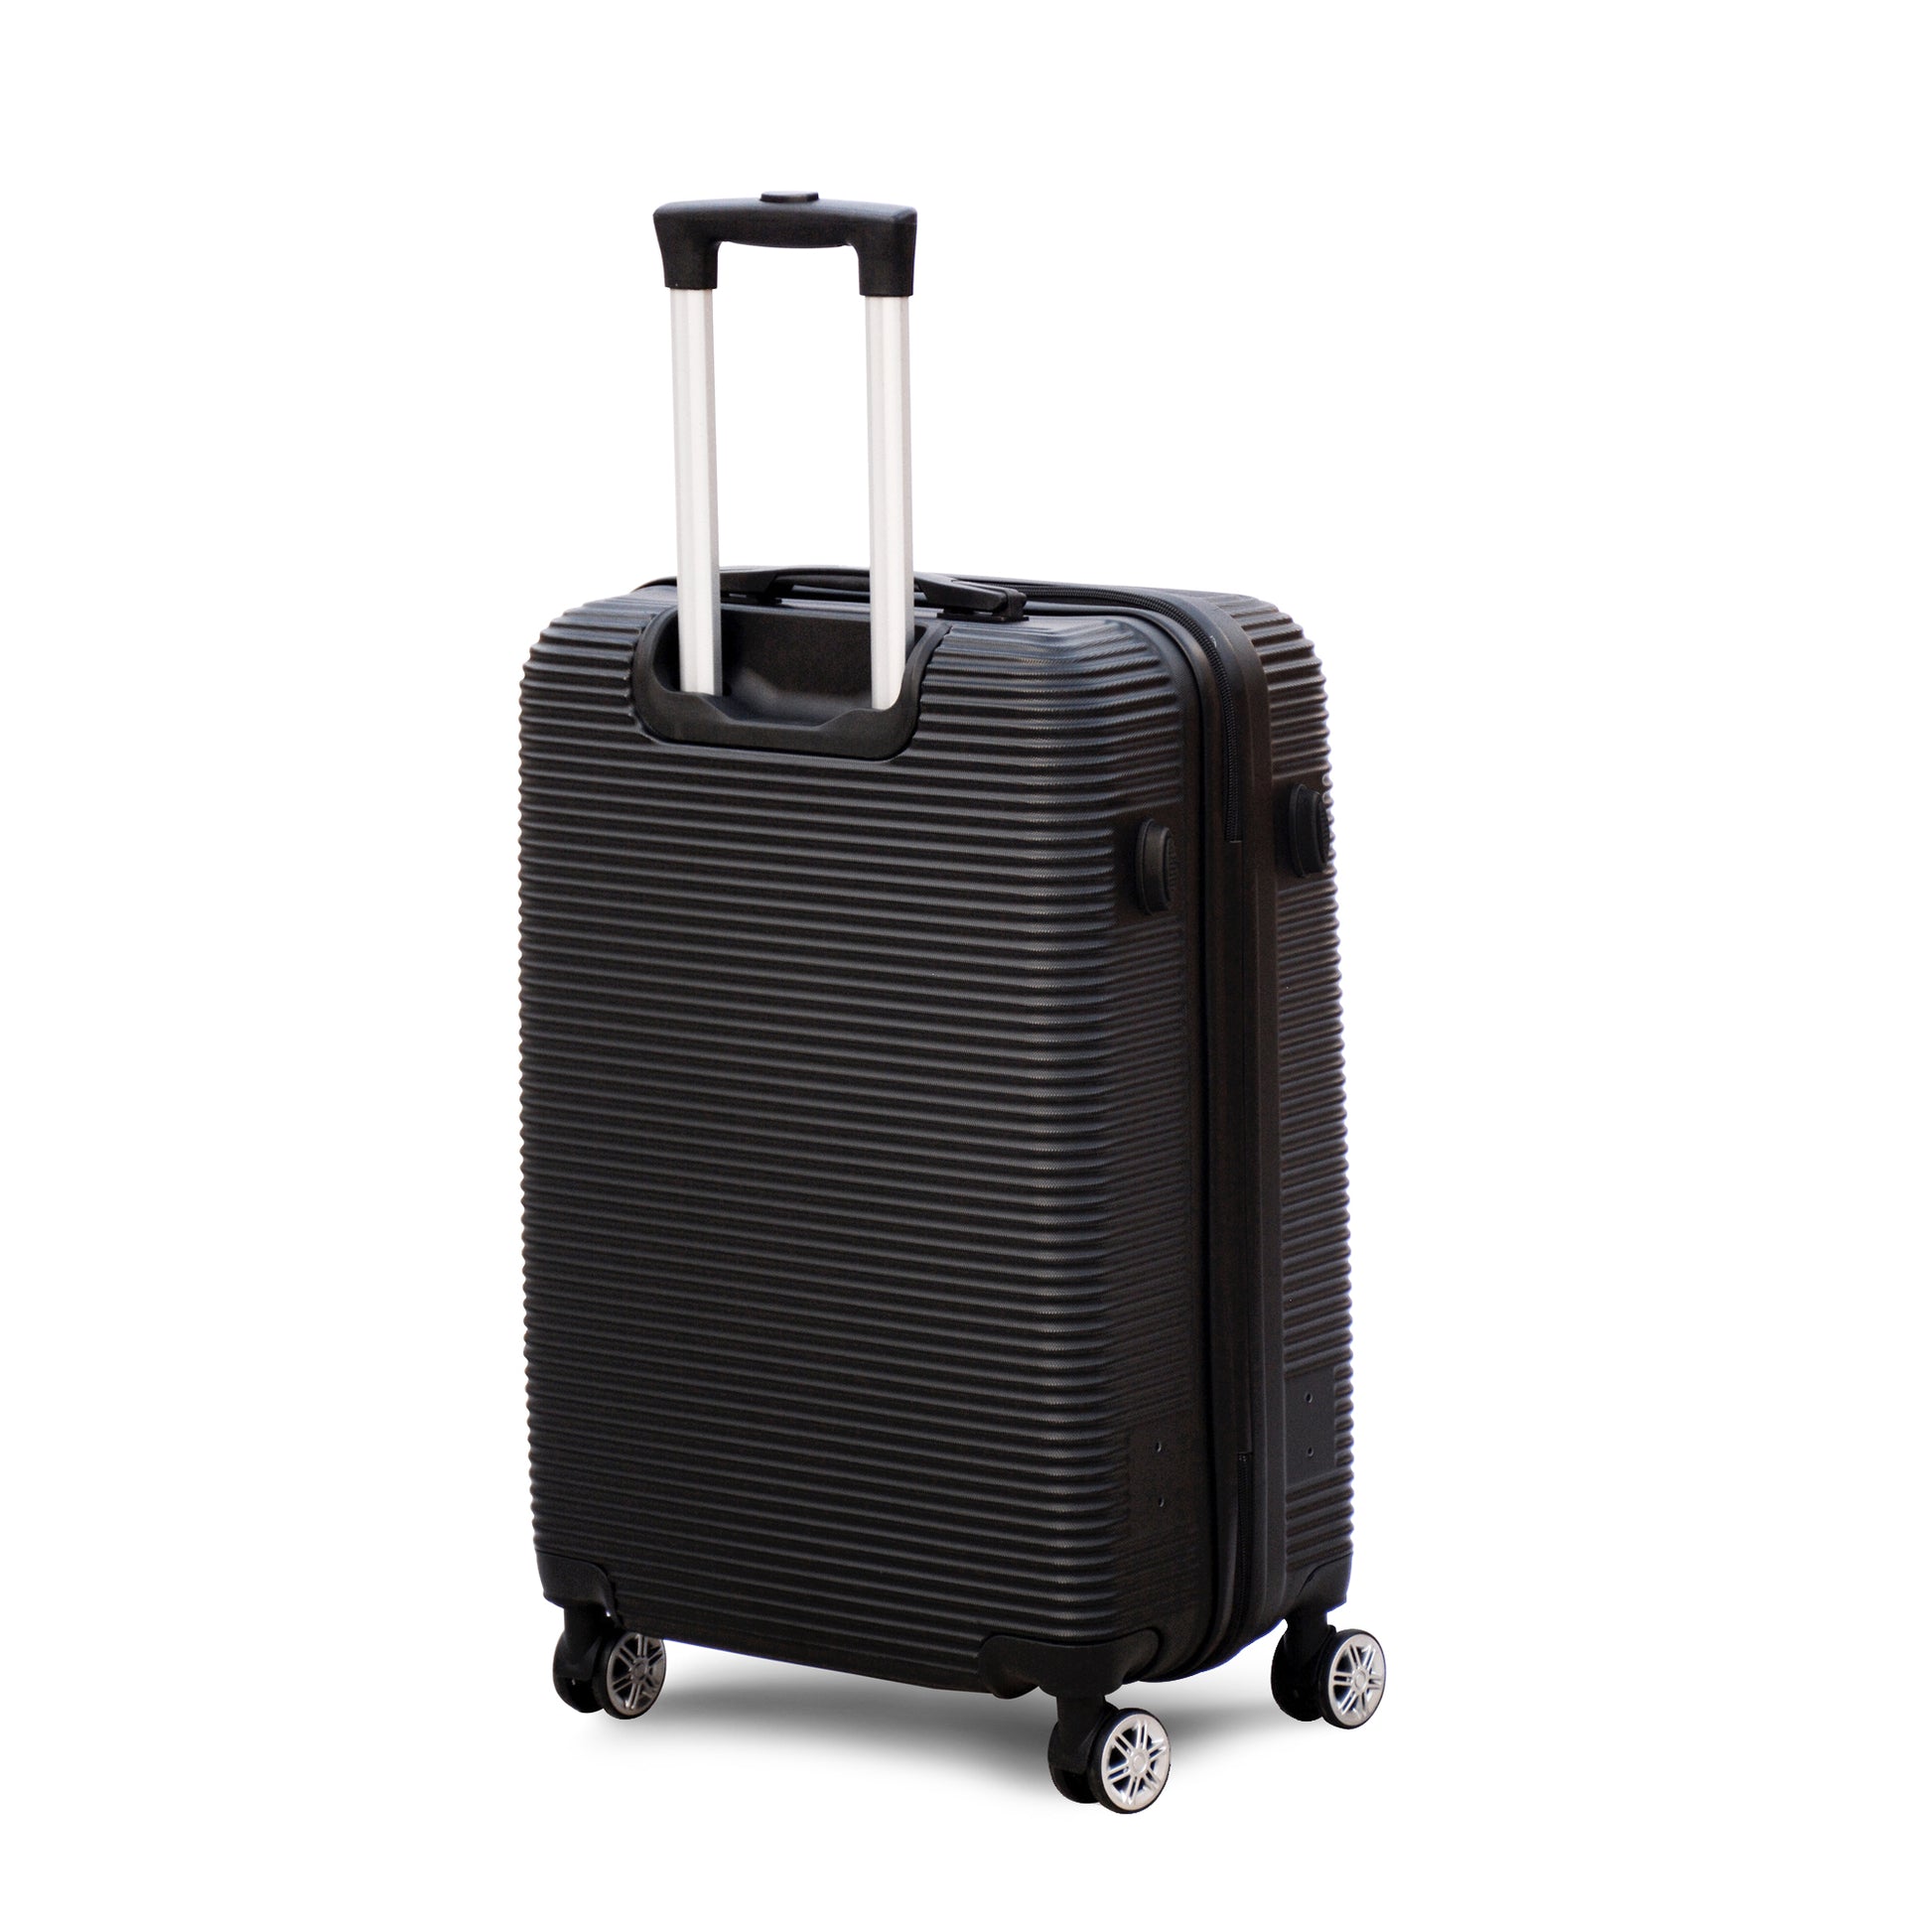 3 Piece Set 20" 24" 28 Inches Black Colour JIAN ABS Line Luggage lightweight Hard Case Trolley Bag With Spinner Wheel Zaappy.com